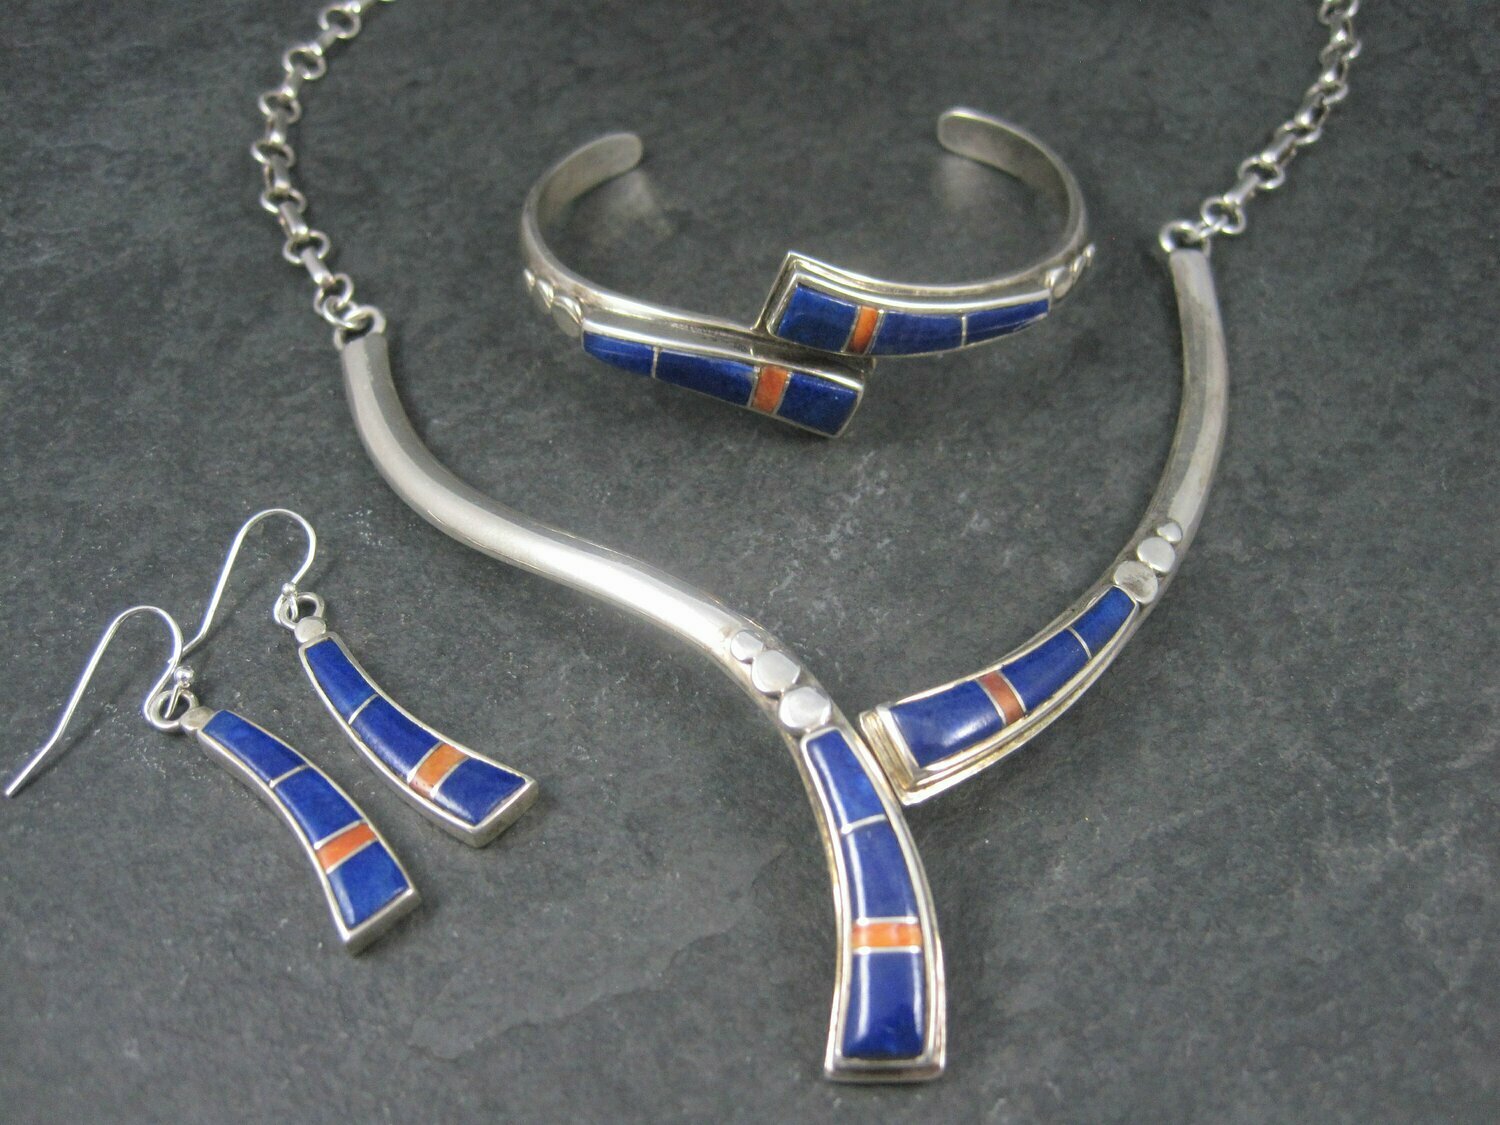 Vintage Southwestern Lapis Coral Inlay Jewelry Set Necklace Cuff Bracelet and Earrings